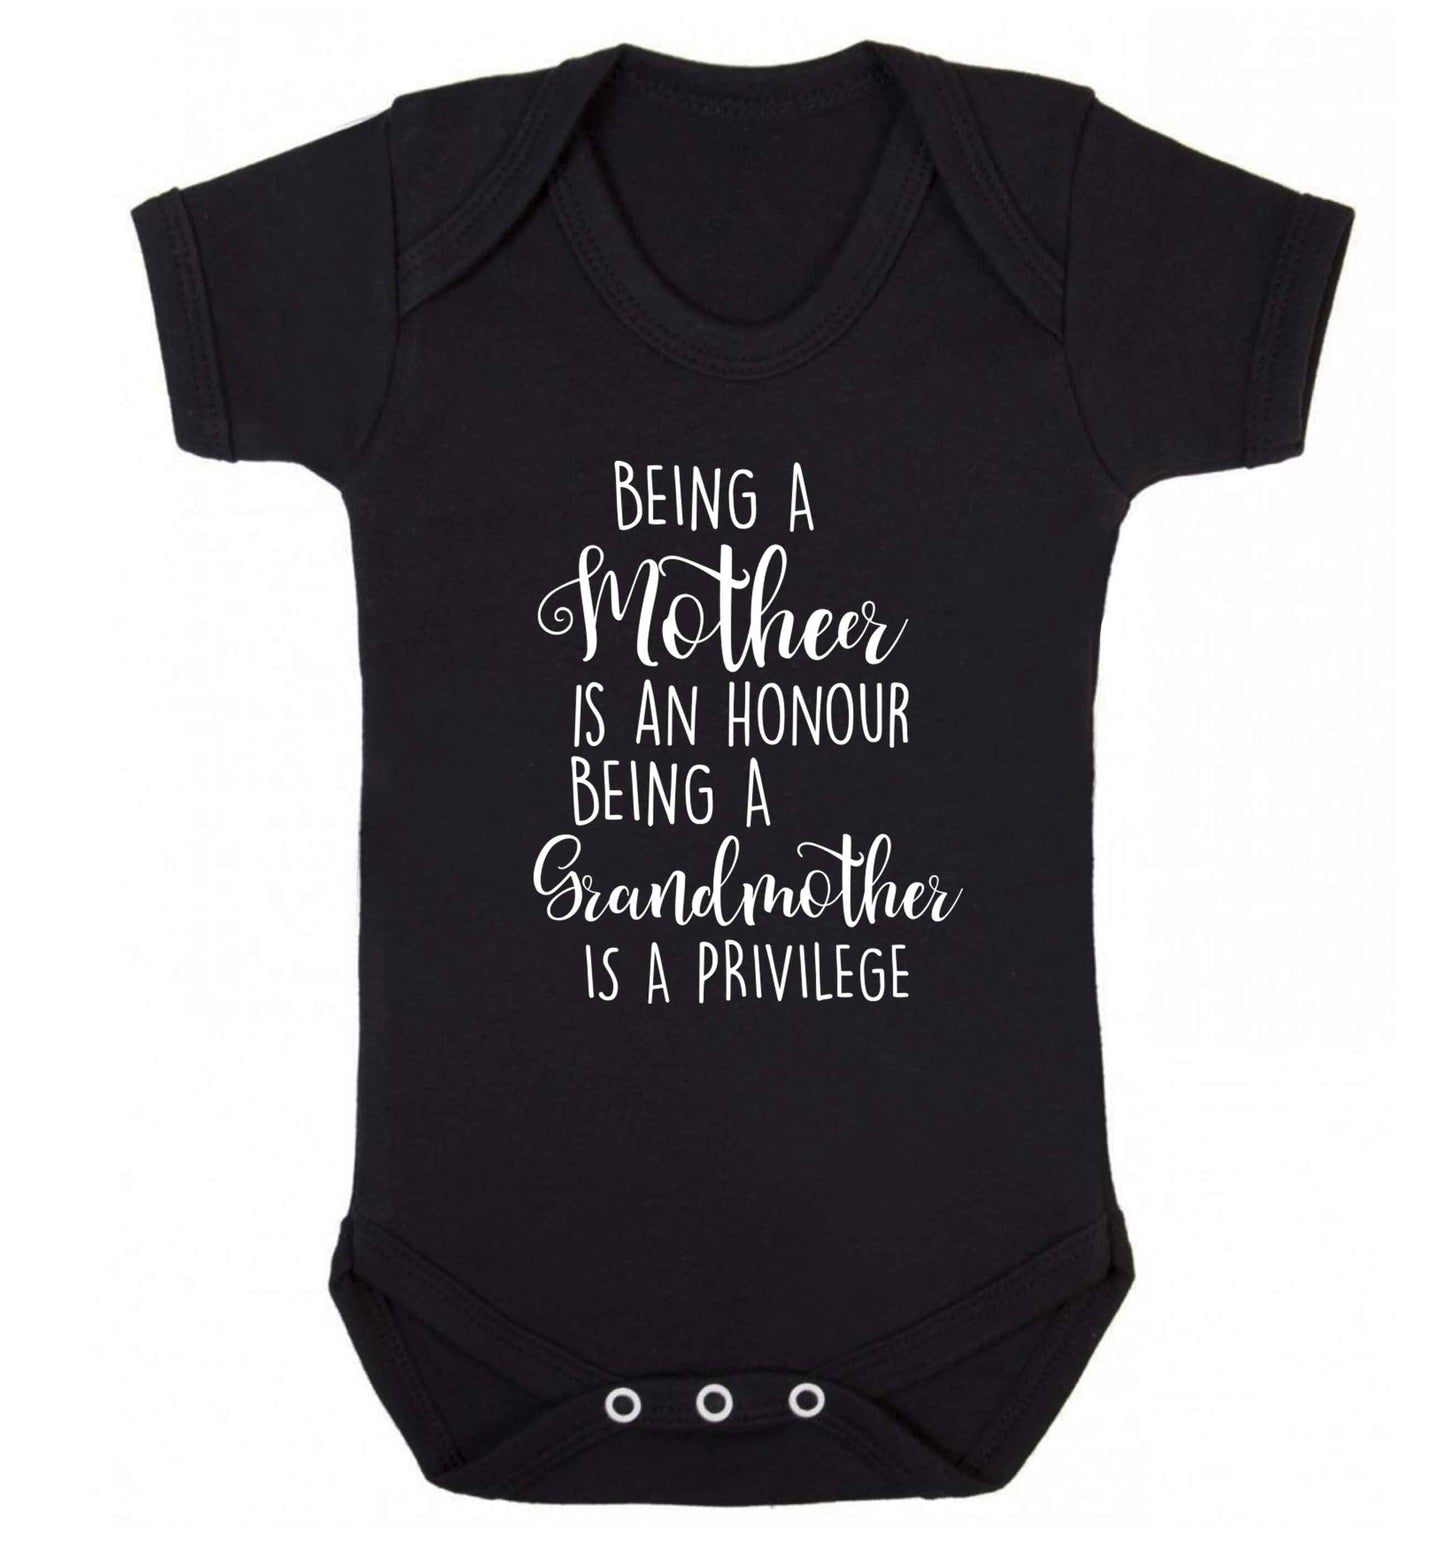 Being a mother is an honour being an grandmother is a privilege Baby Vest black 18-24 months